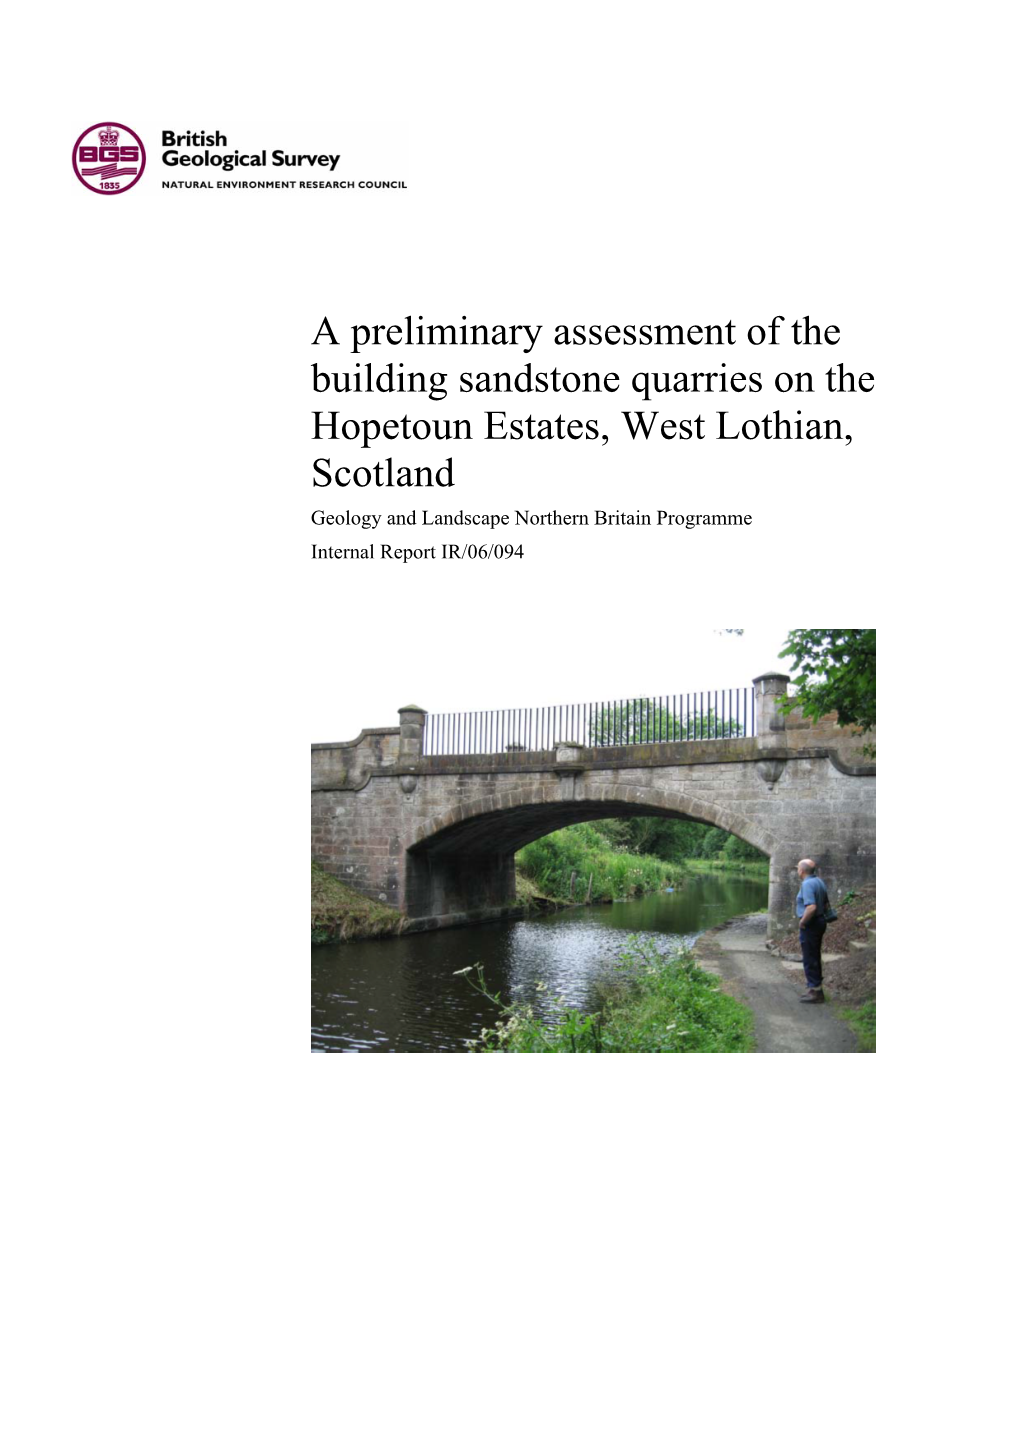 A Preliminary Assessment of the Building Sandstone Quarries on The